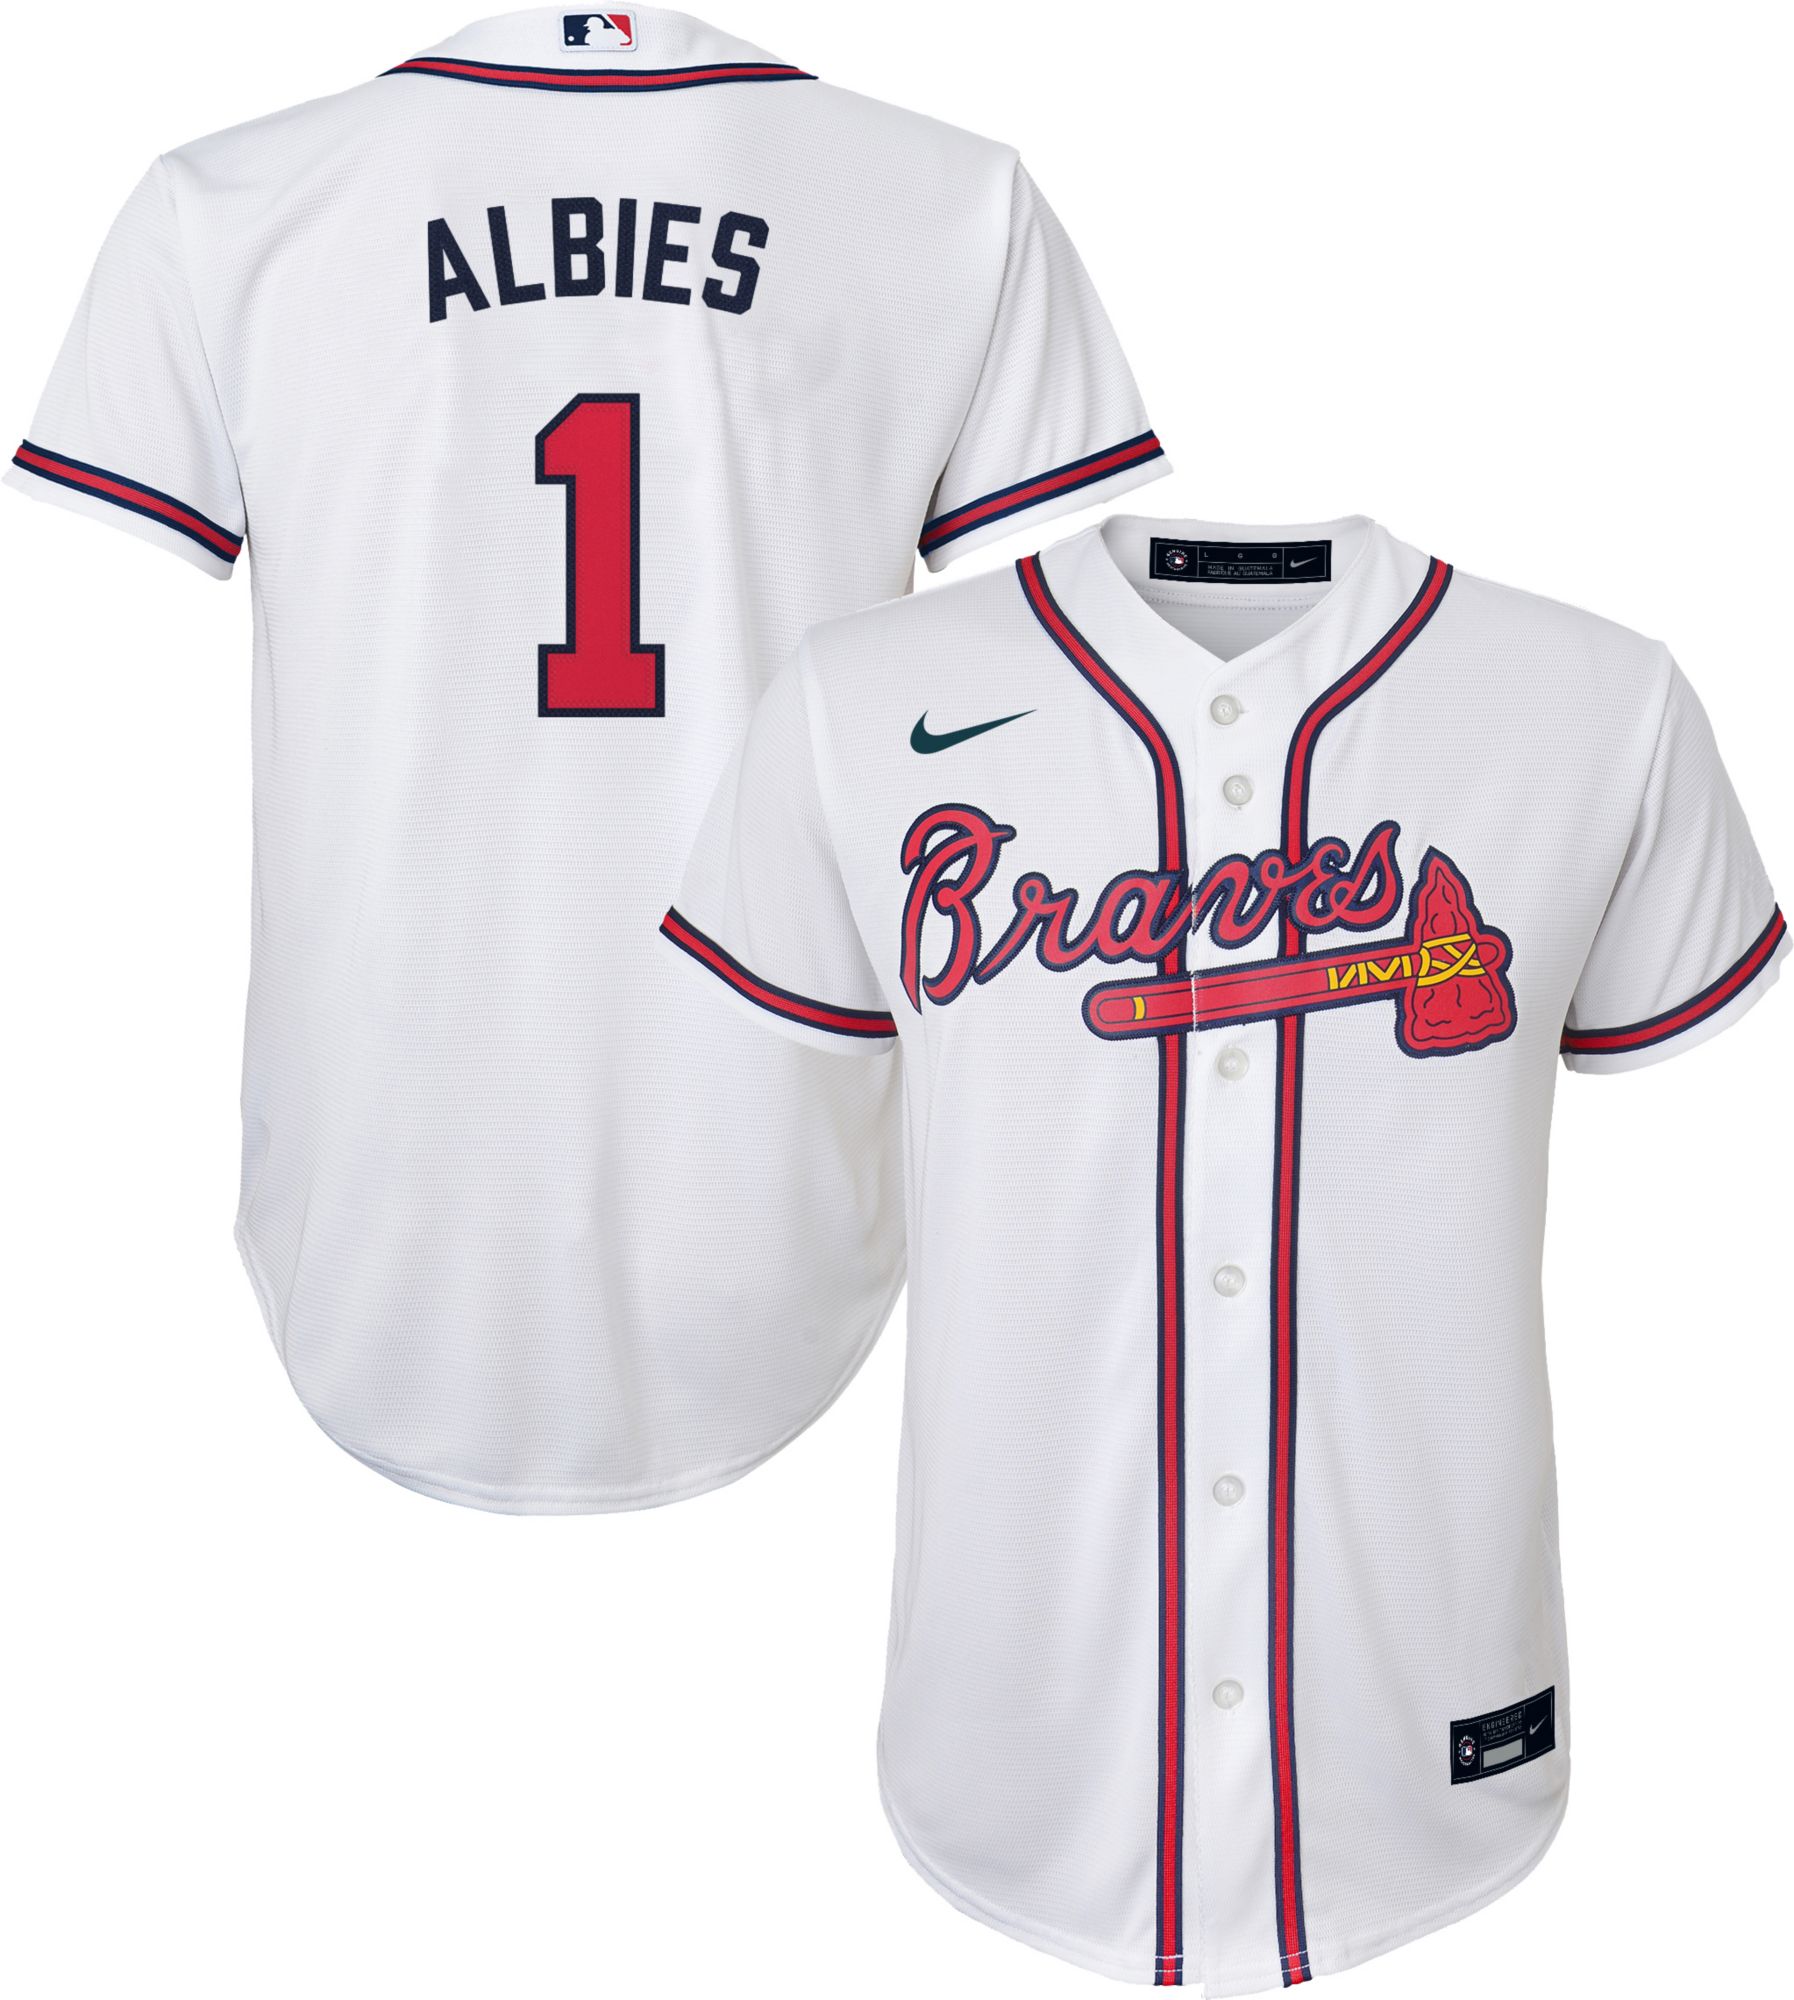 albies youth jersey